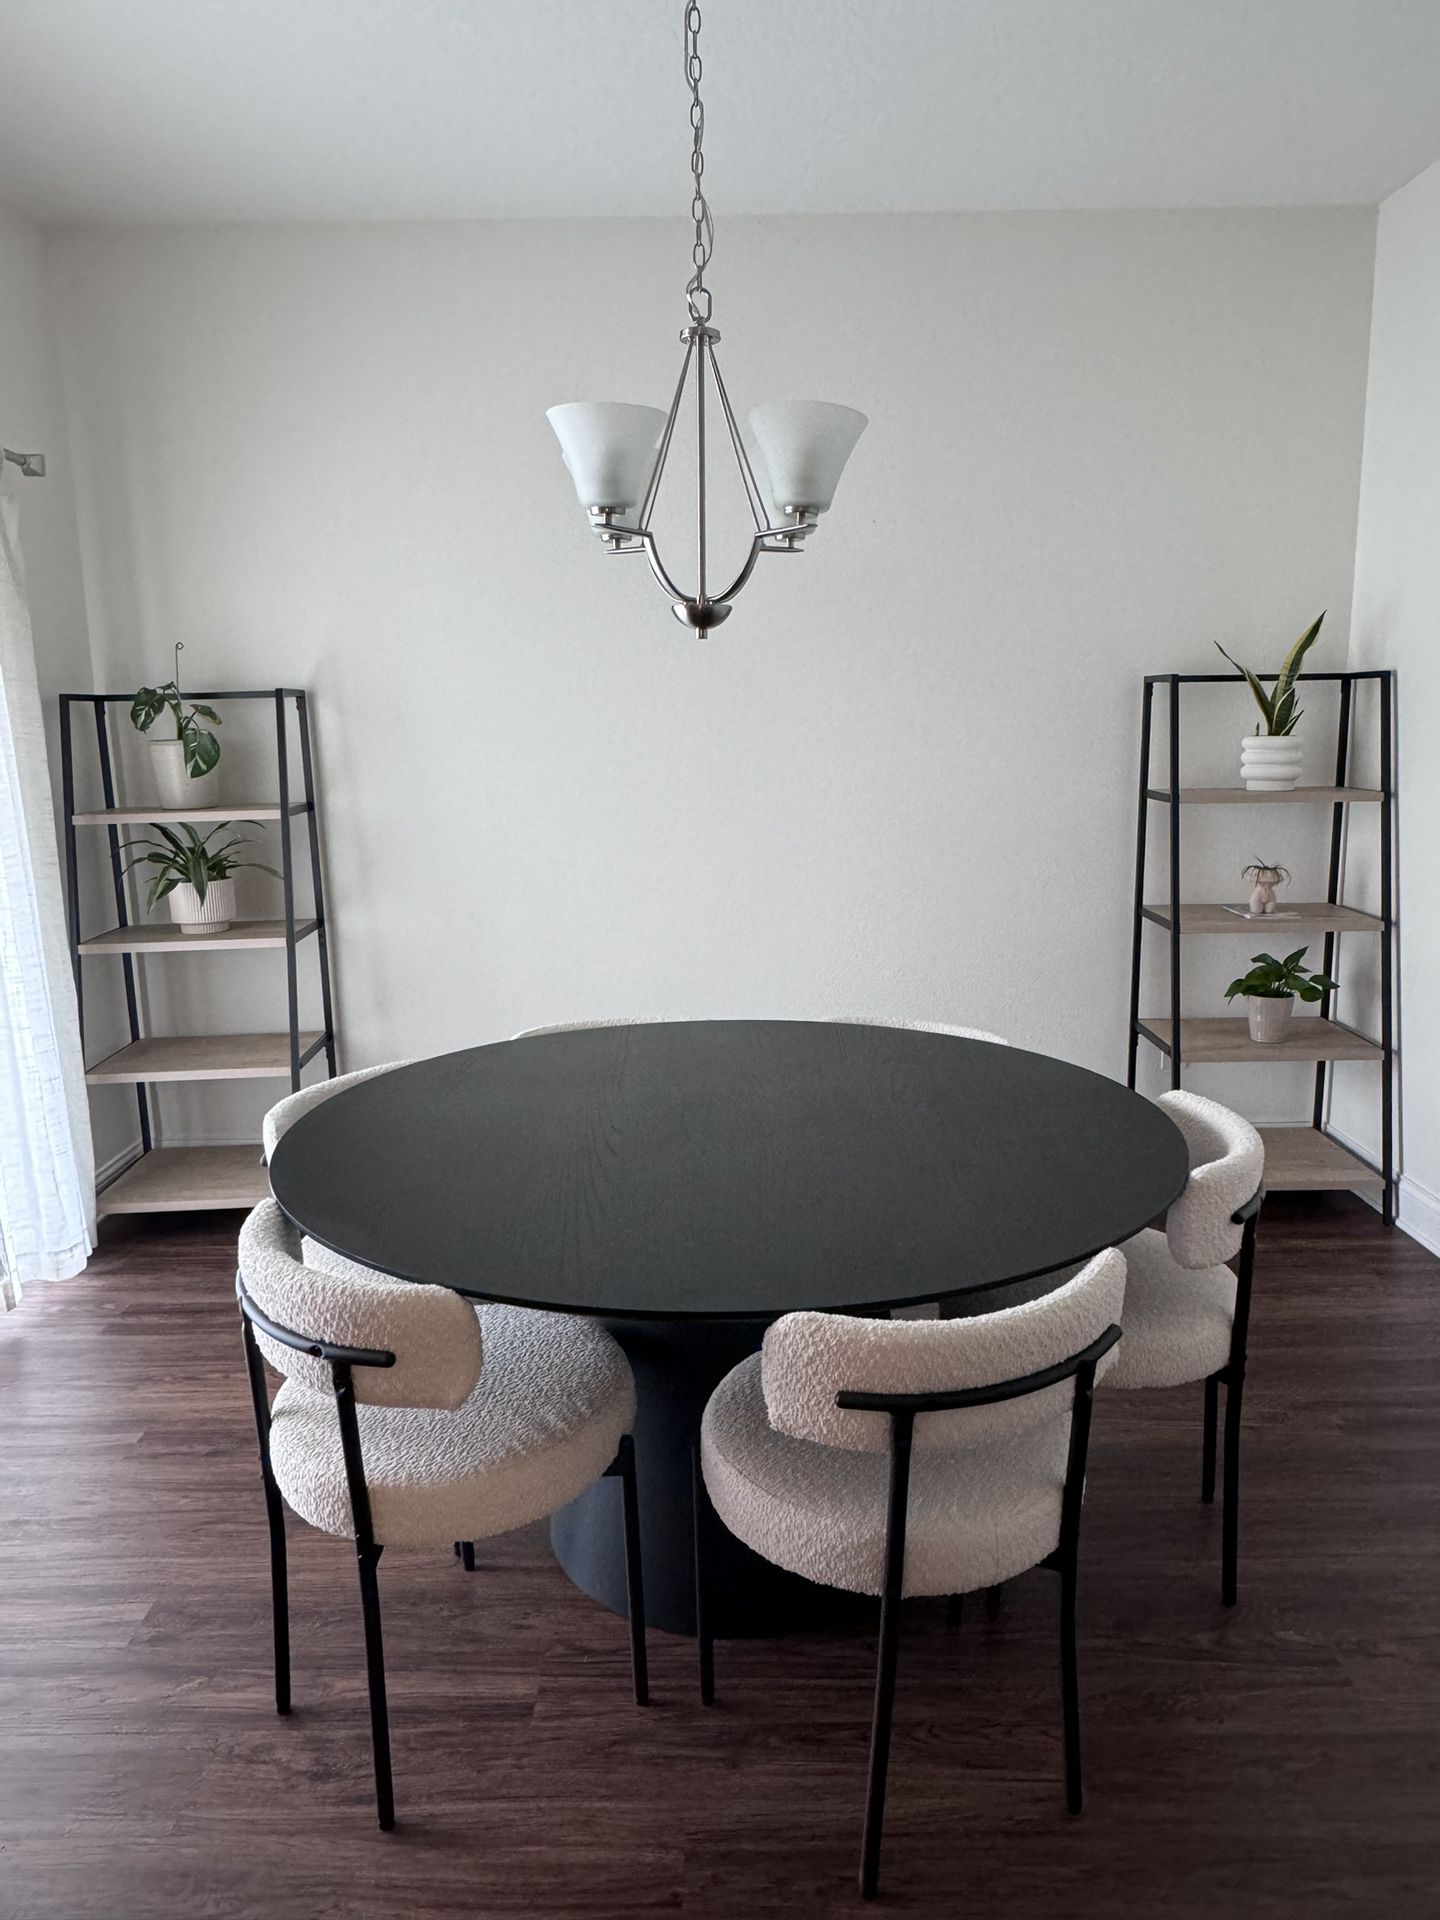 59” Black Round Dining Table And Chairs 